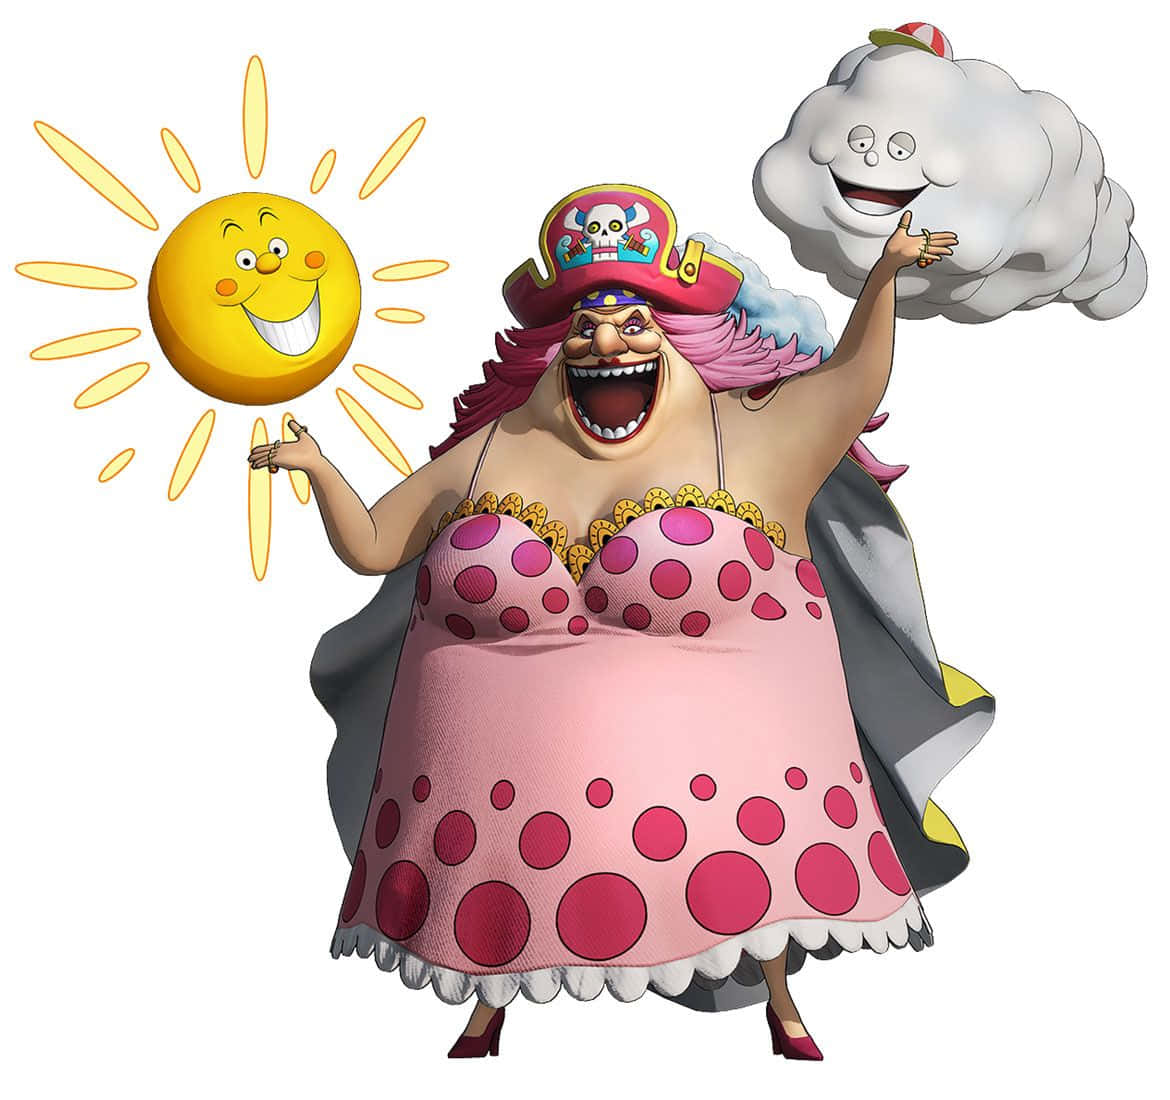 Charlotte Linlin, the Yonko and Captain of the Big Mom Pirates Wallpaper